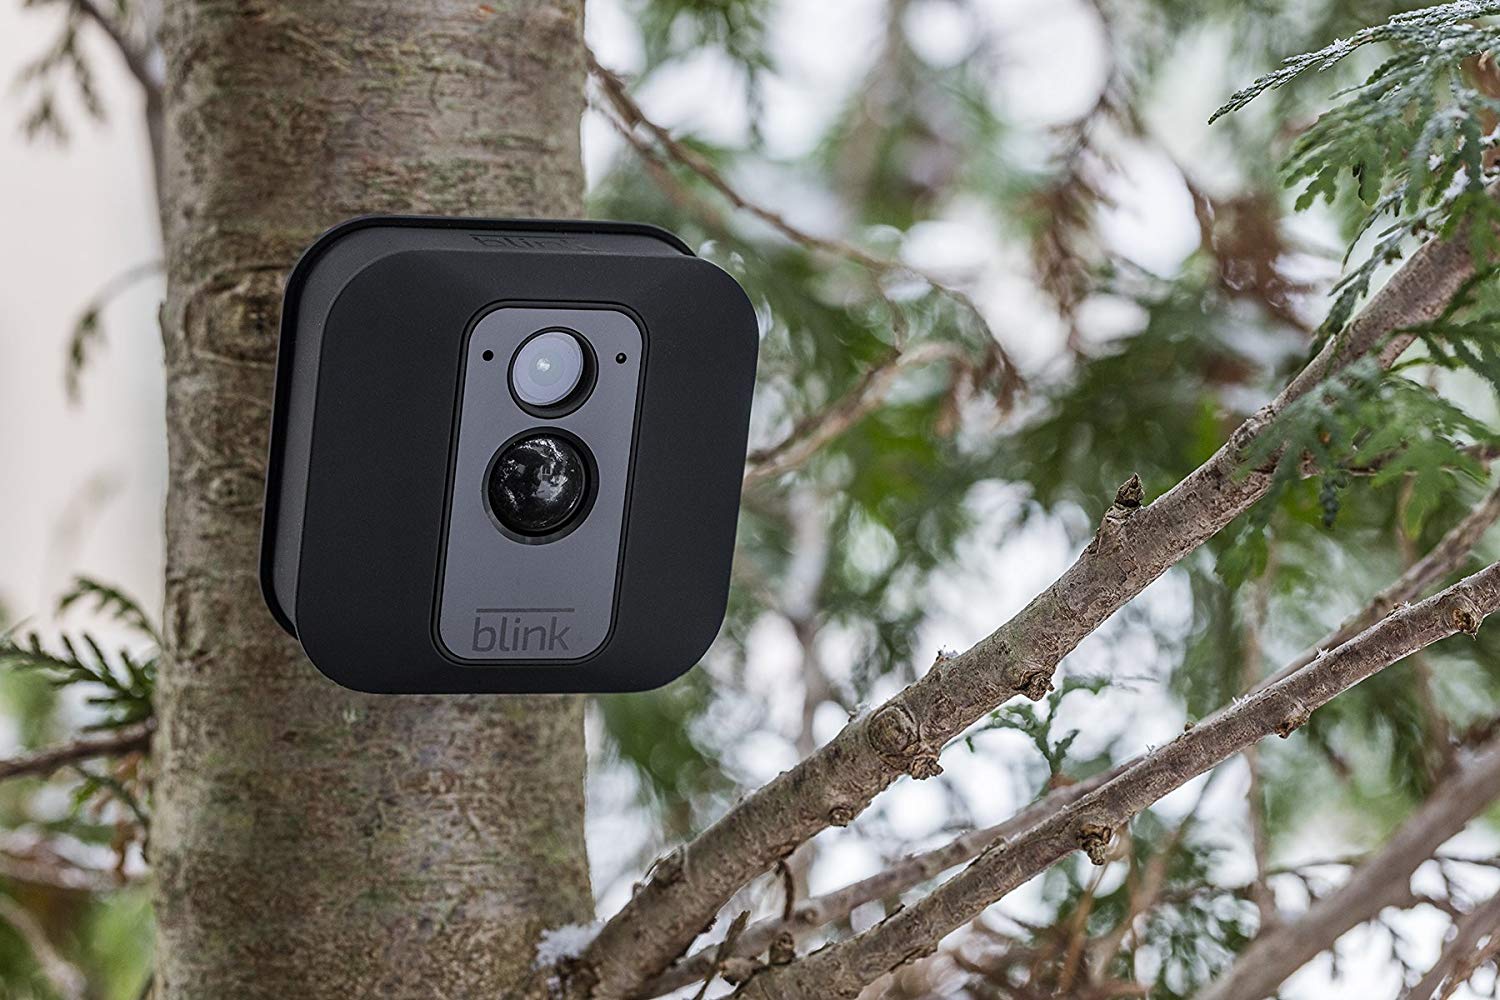 Blink S Wireless Security Cams With 2 Year Battery Life Have Never Been Cheaper Bgr